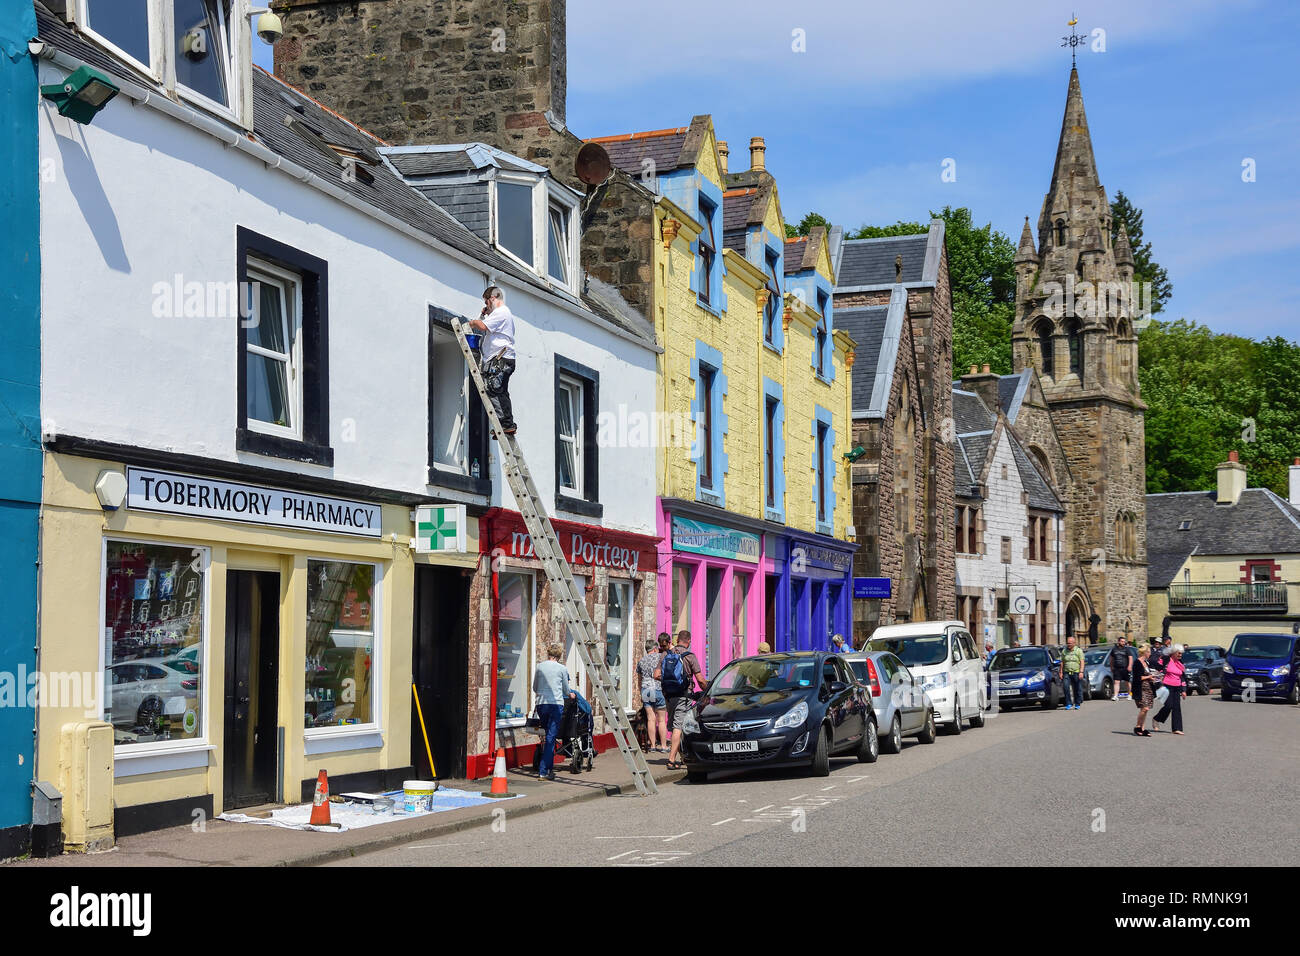 Main Street, Tobermory, Isle of Mull, Inner Hebrides, Argyll et Bute, Écosse, Royaume-Uni Banque D'Images